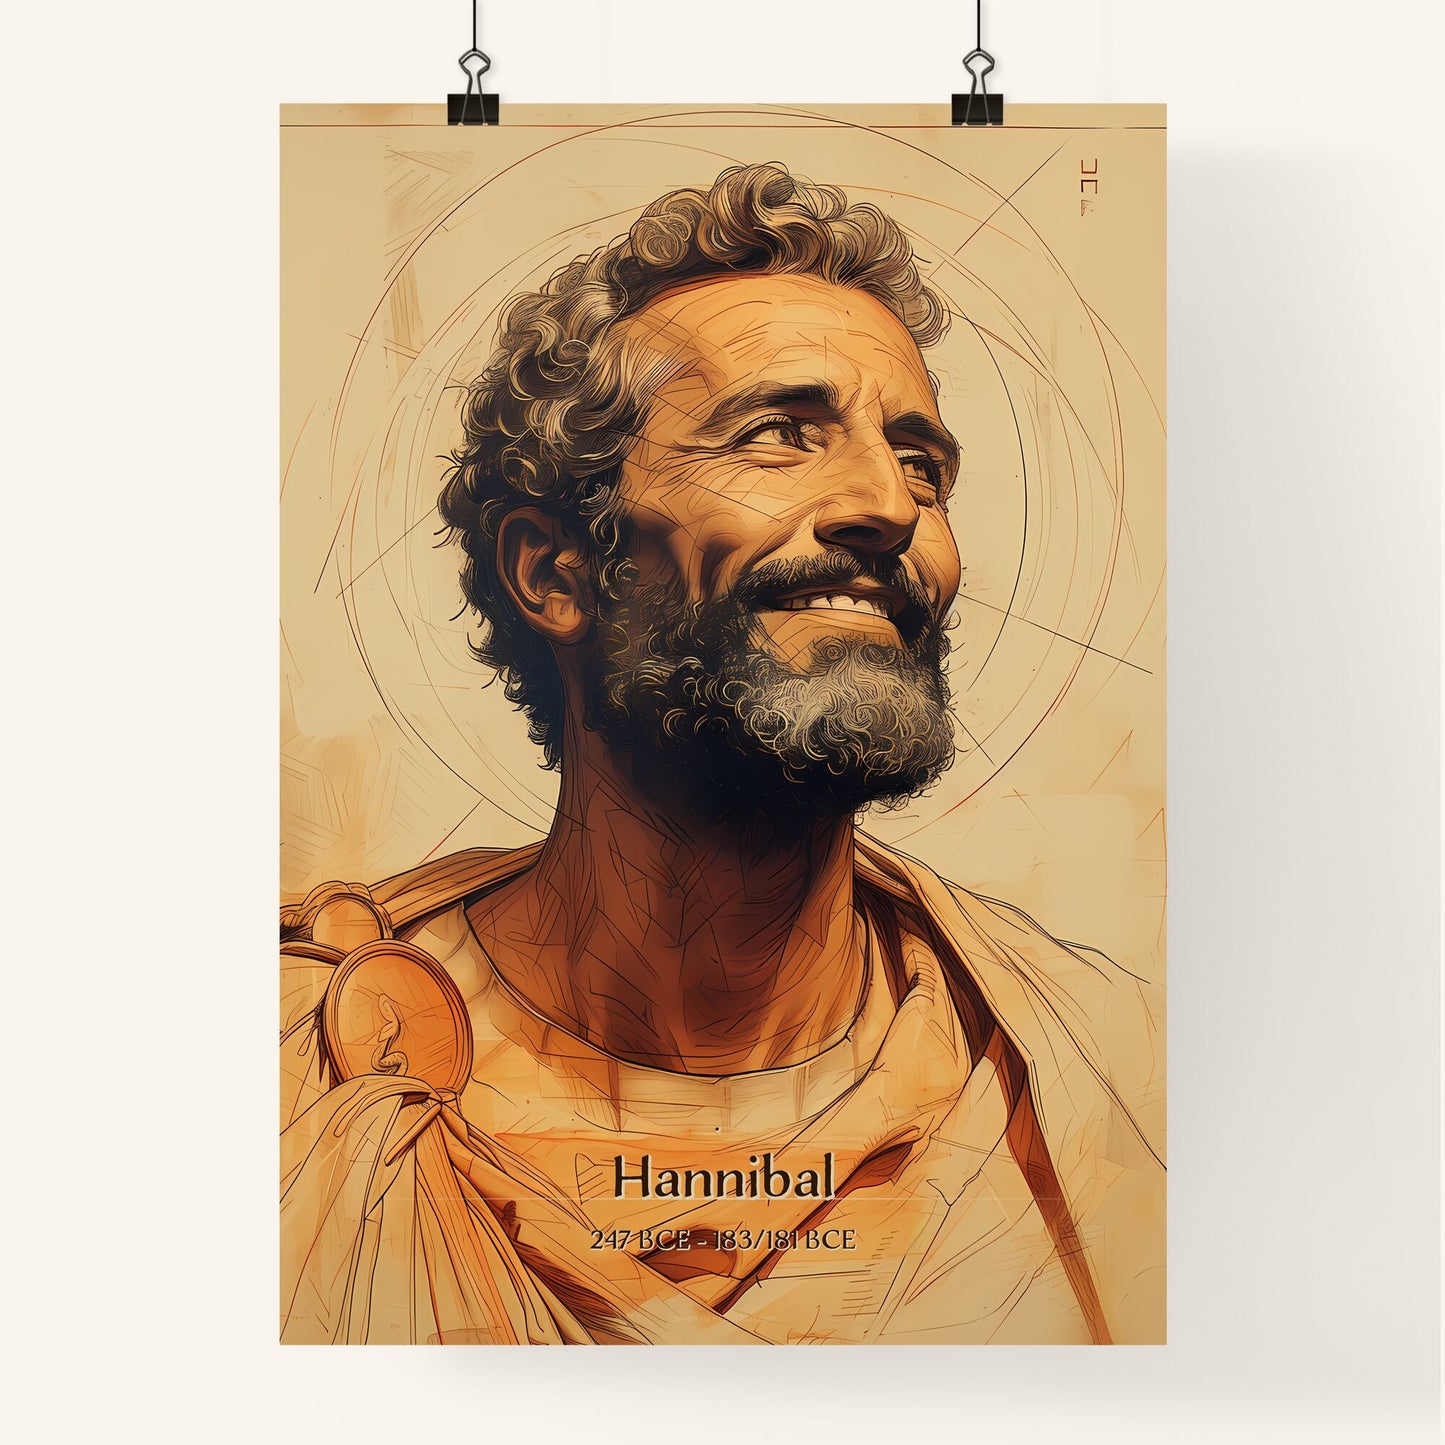 Hannibal, 247 BCE - 183/181 BCE, A Poster of a man with beard and mustache smiling Default Title